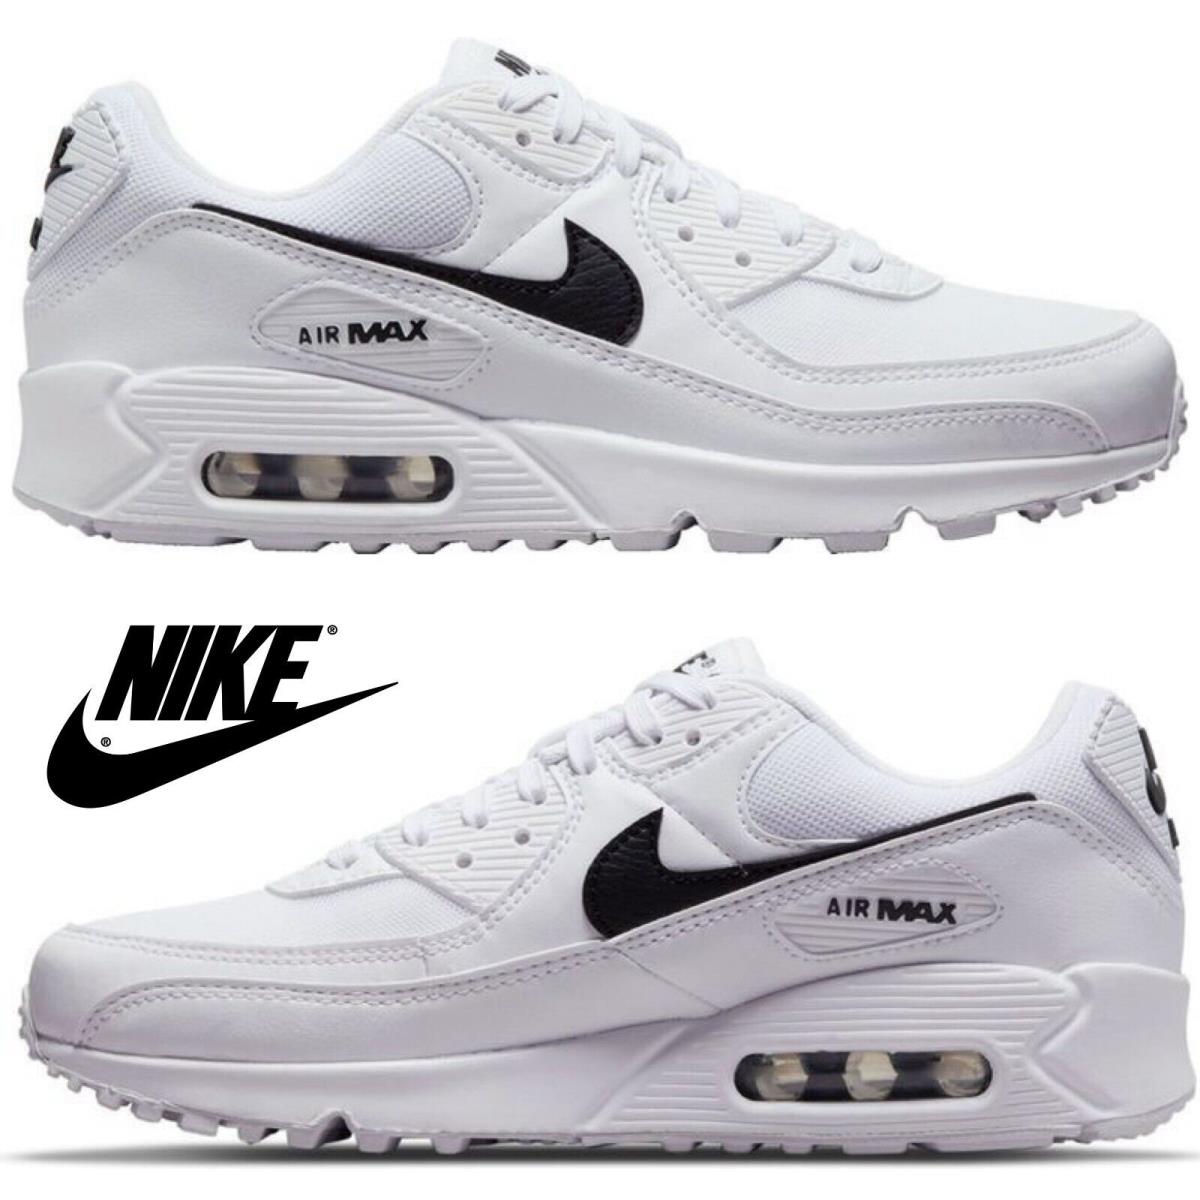 Nike Air Max 90 Women s Sneakers Casual Shoes Premium Running Gym Sport White